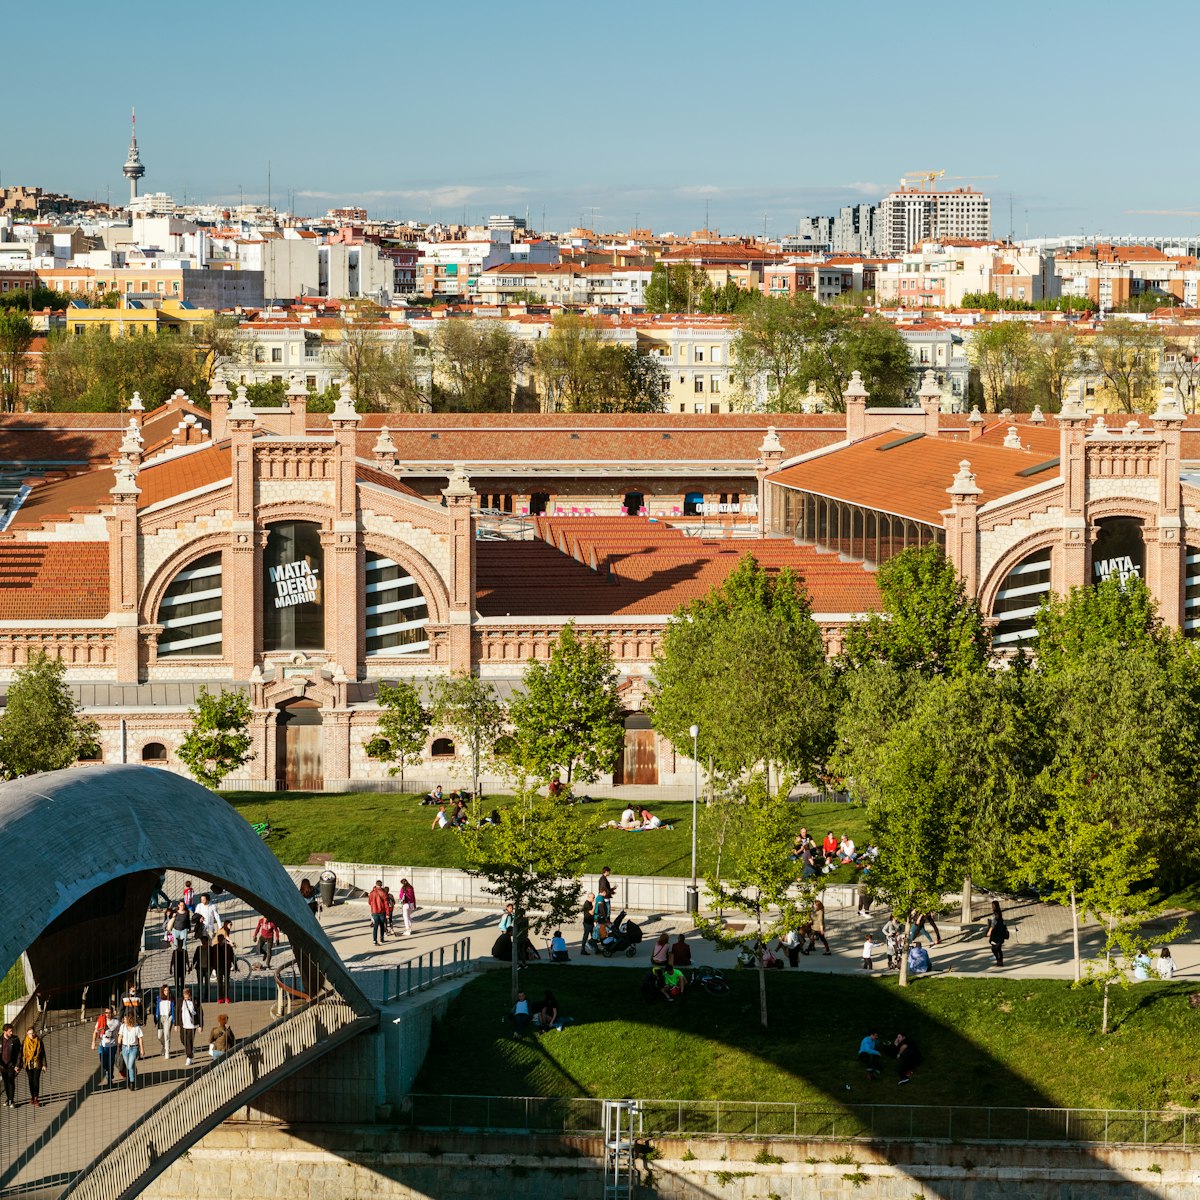 Locals and tourists walk though a modern bridge over the Manzanares River in the public park of Madrid Río in Madrid, Spain, with the Matadero building (a former slaughterhouse converted to an arts centre) in the background.